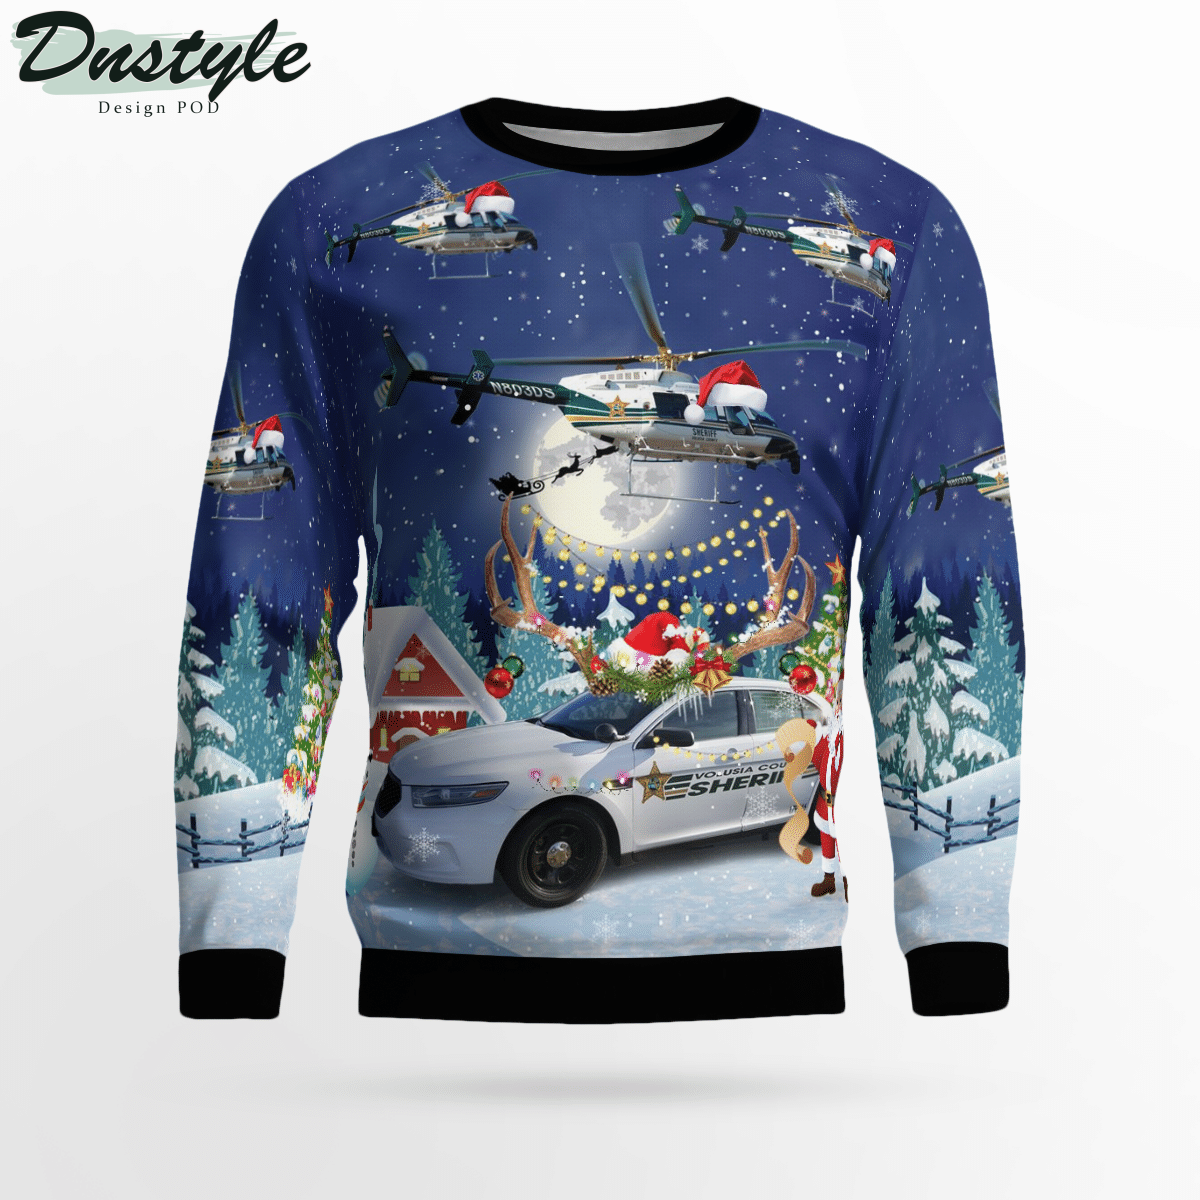 Volusia County Sheriff Bell 407 & Ford Police Interceptor Ugly Christmas Sweater